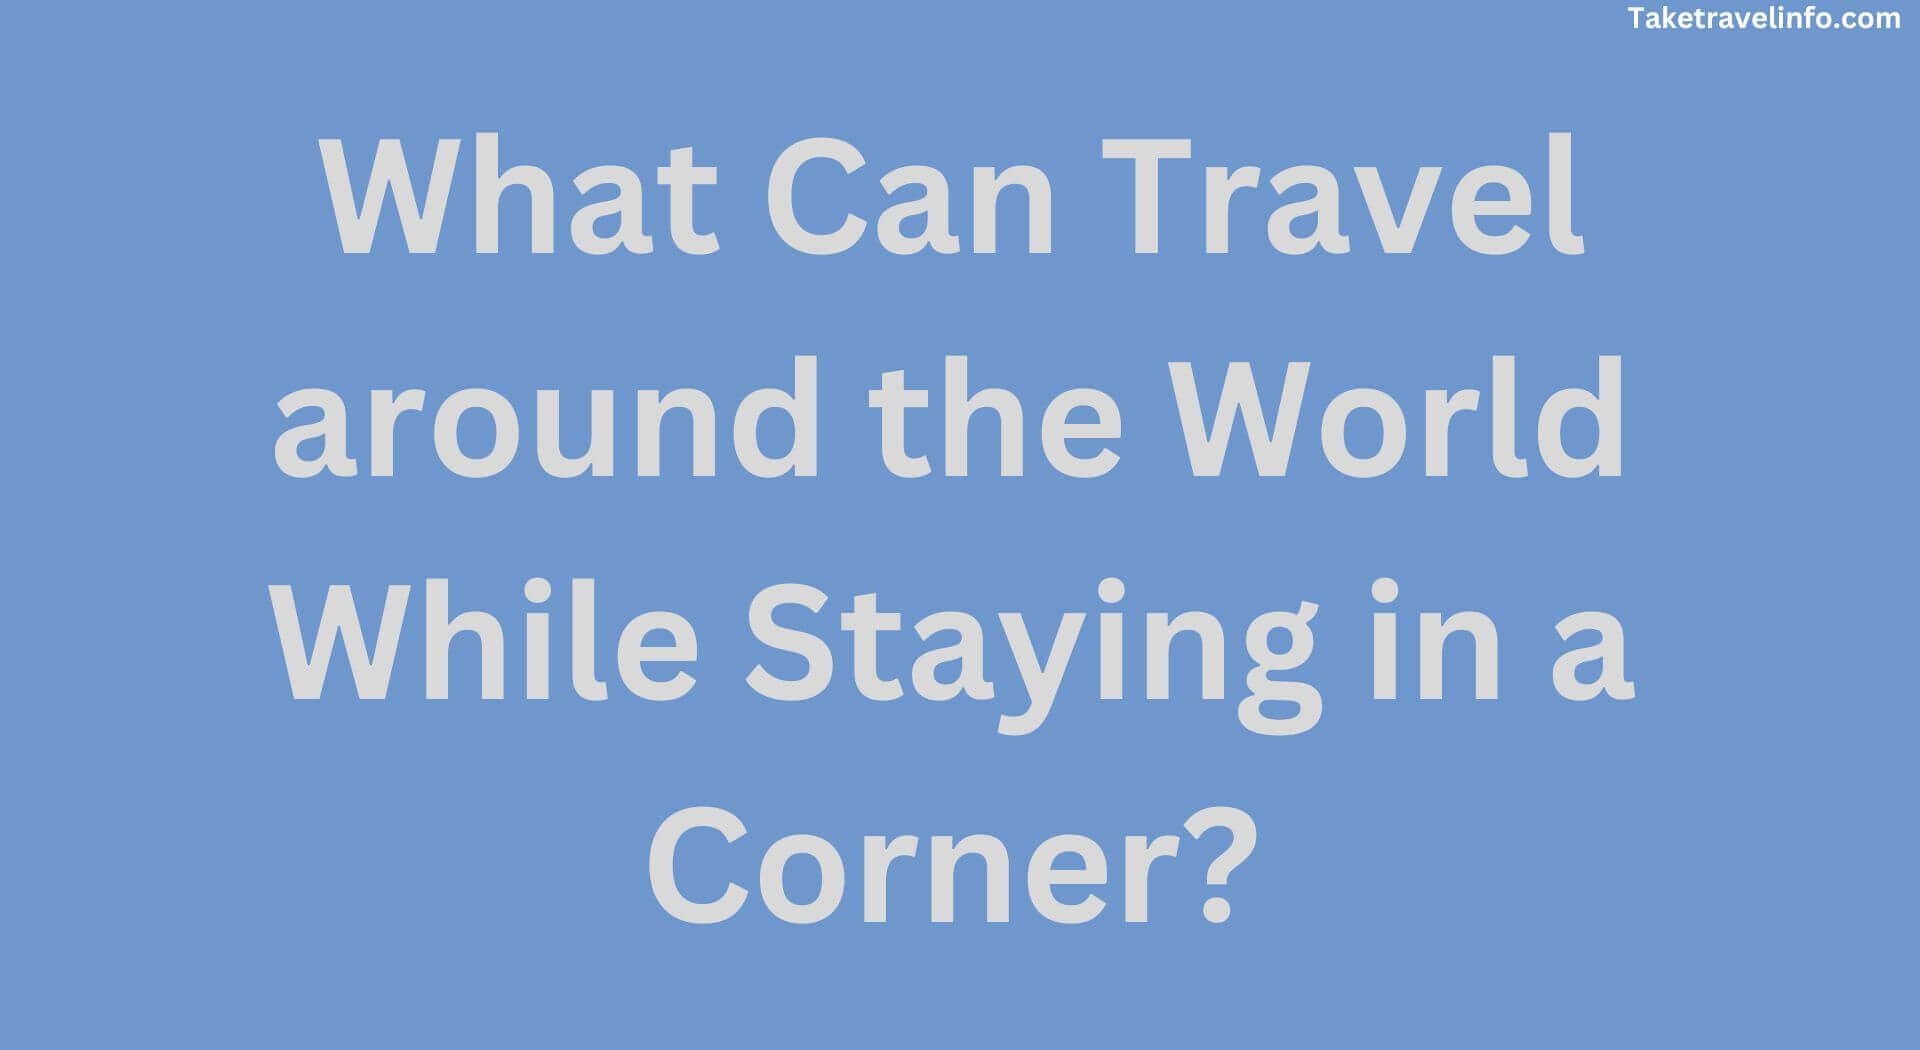 What Can Travel around the World While Staying in a Corner?